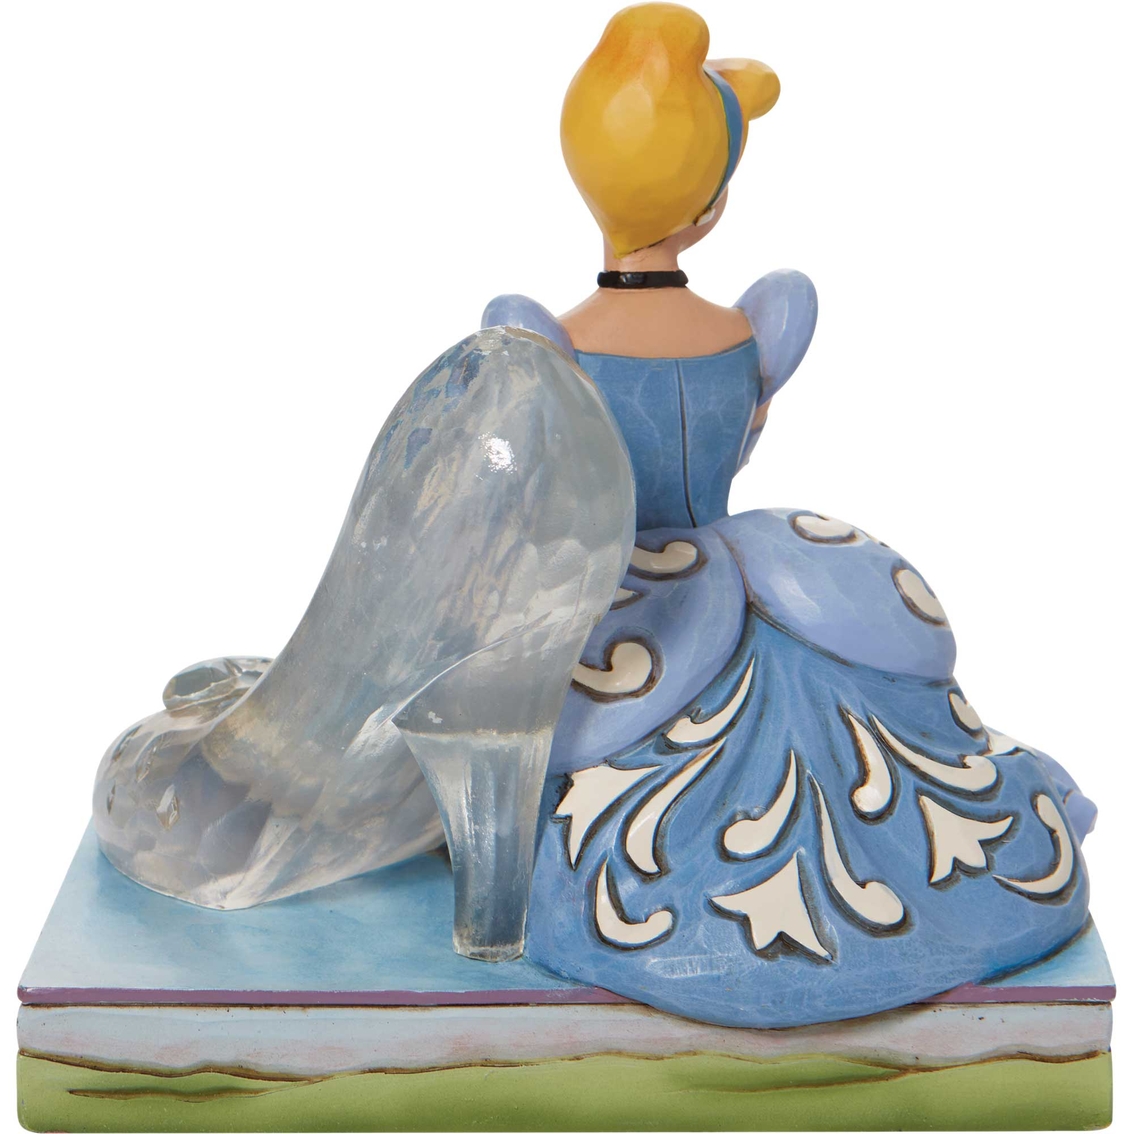 Disney Traditions Cinderella and Glass Slipper - Image 2 of 4